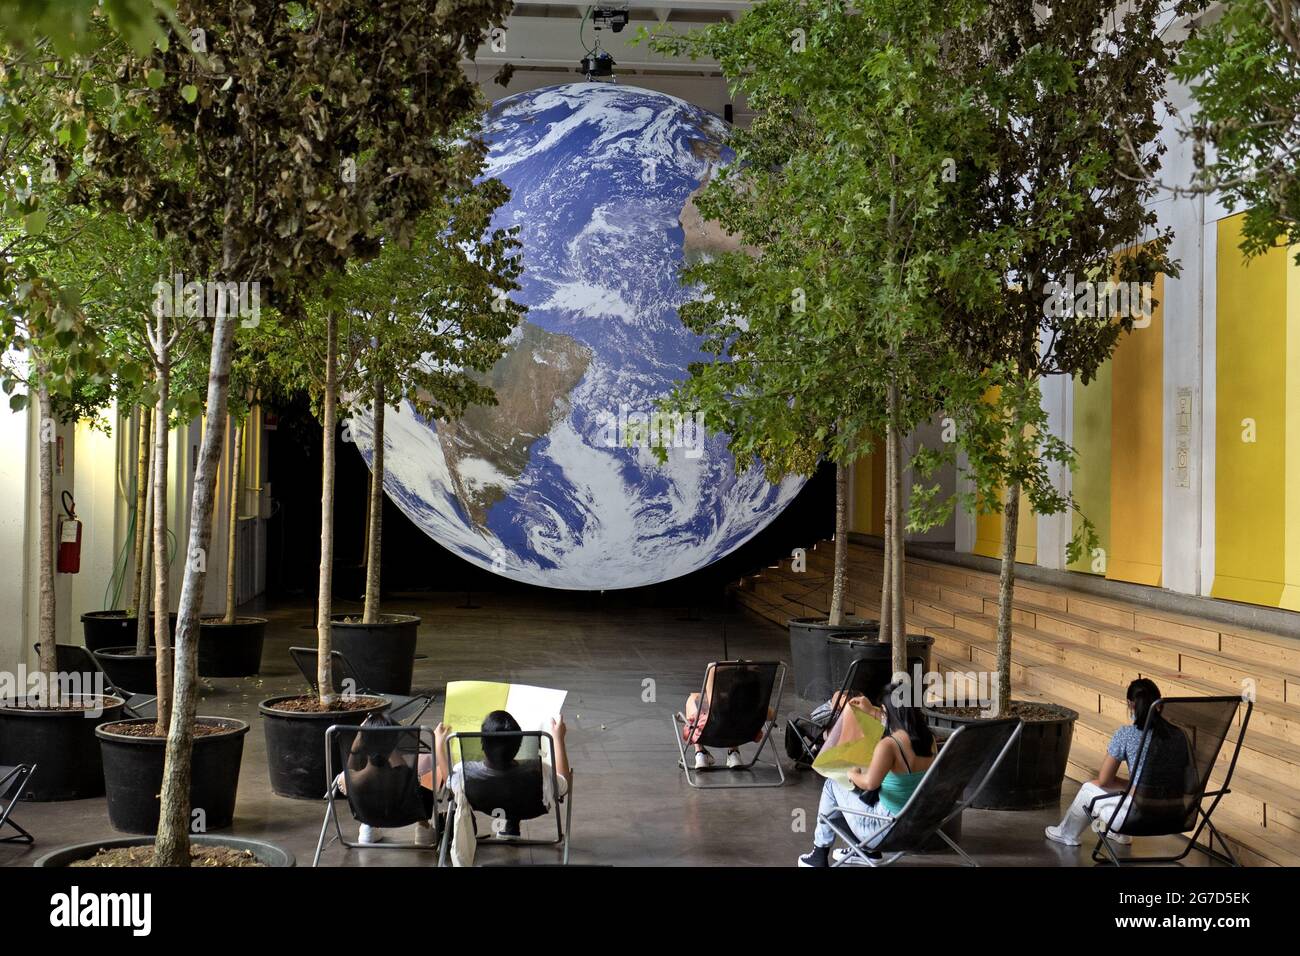 Gaia, an art installation of the british artist Luke Jerram about our planet earth, at Base, Milan, Italy. Stock Photo